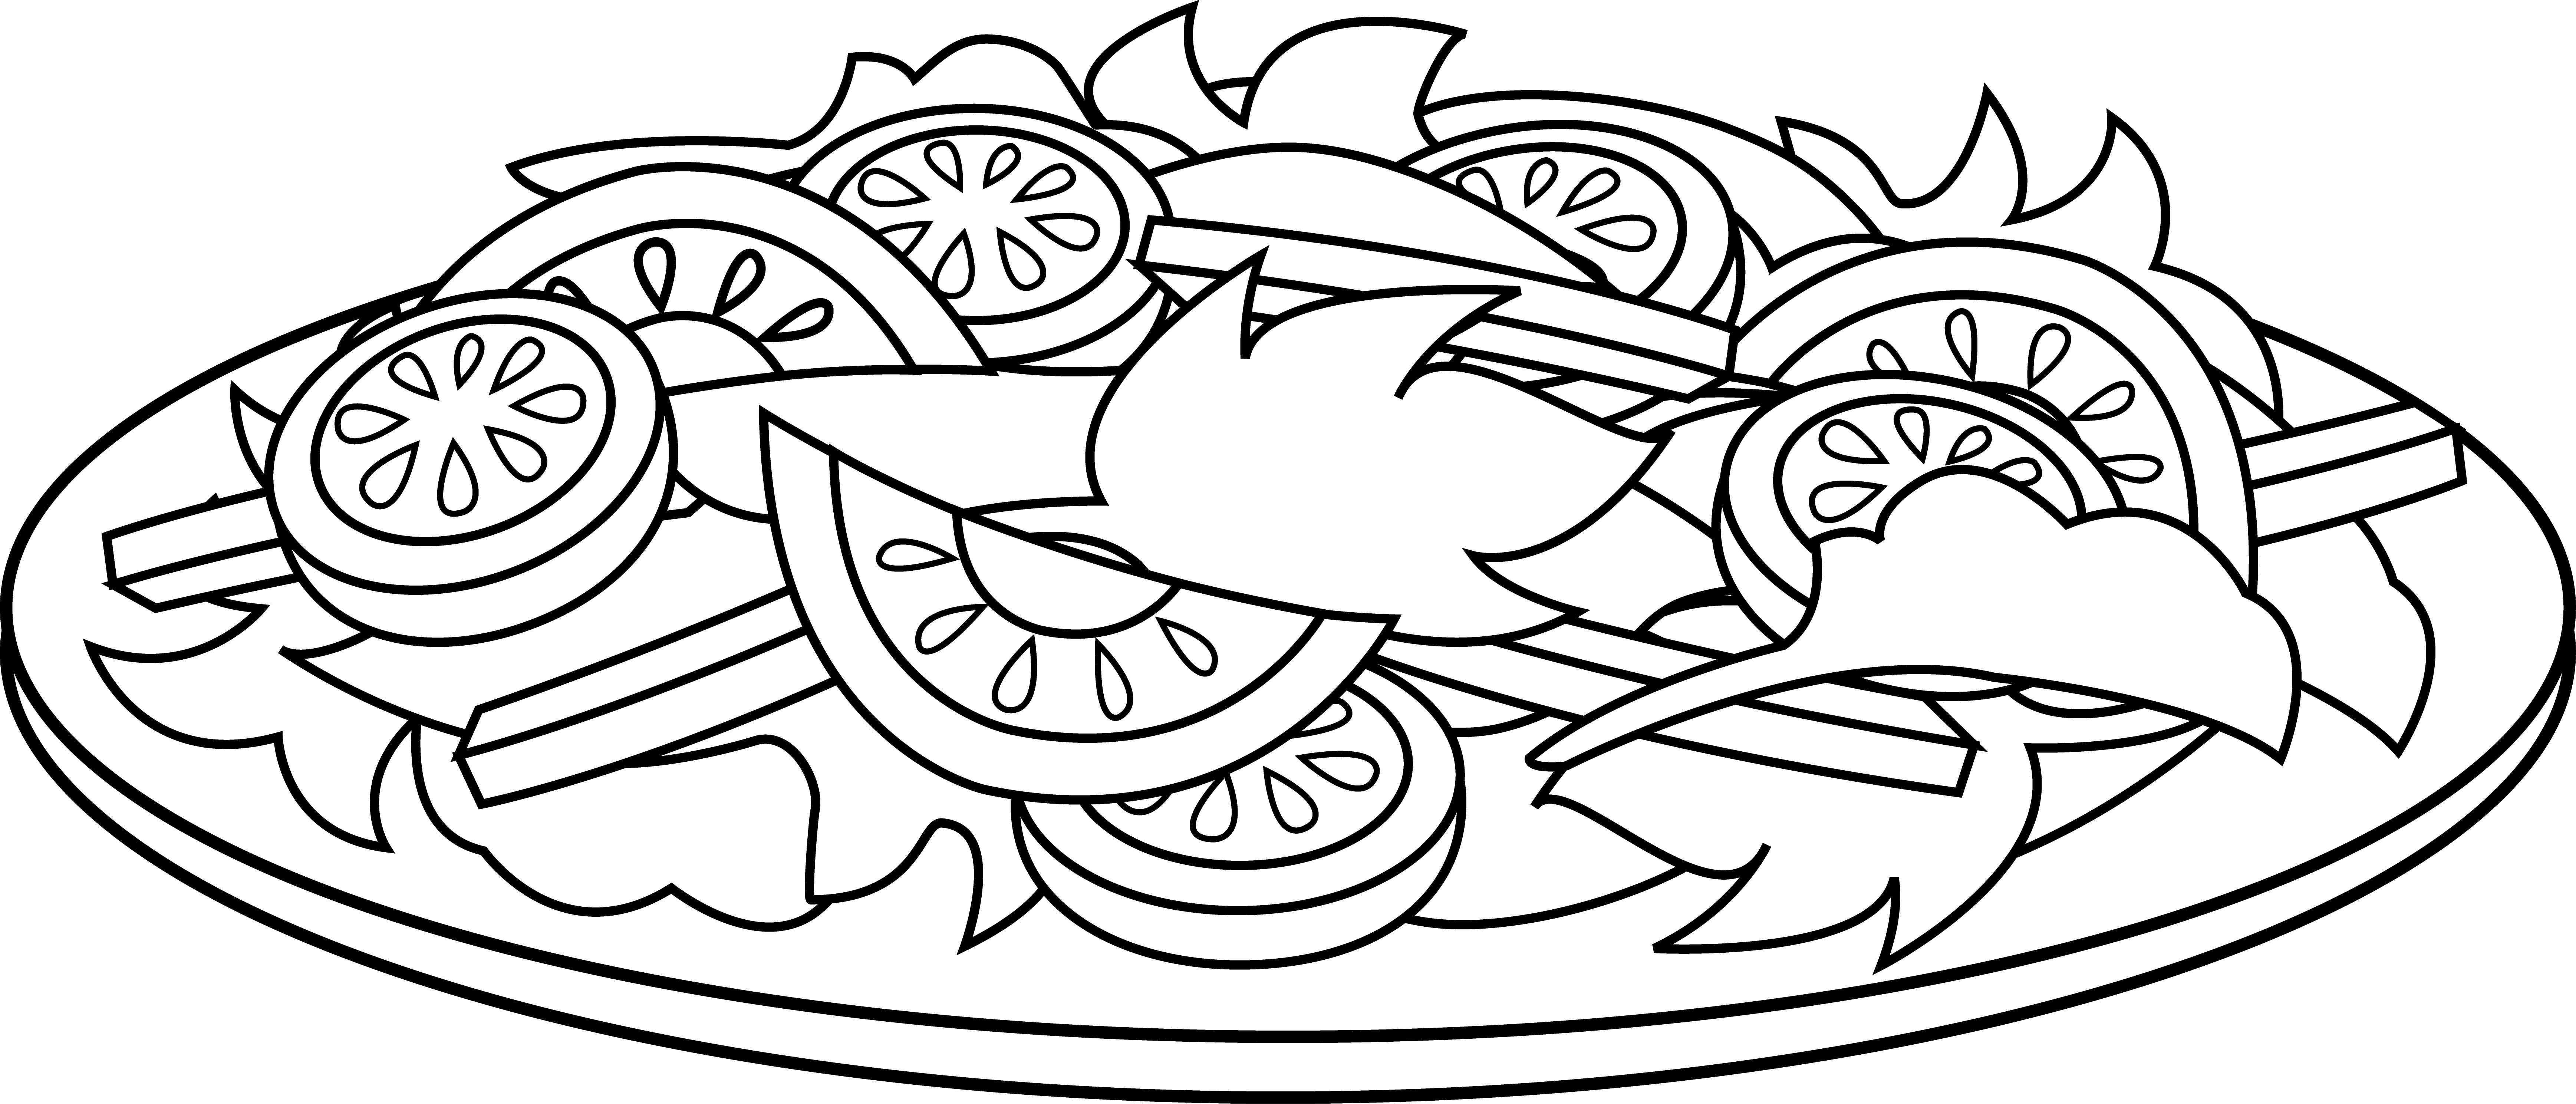 Salad drawing at getdrawings. Lettuce clipart coloring page